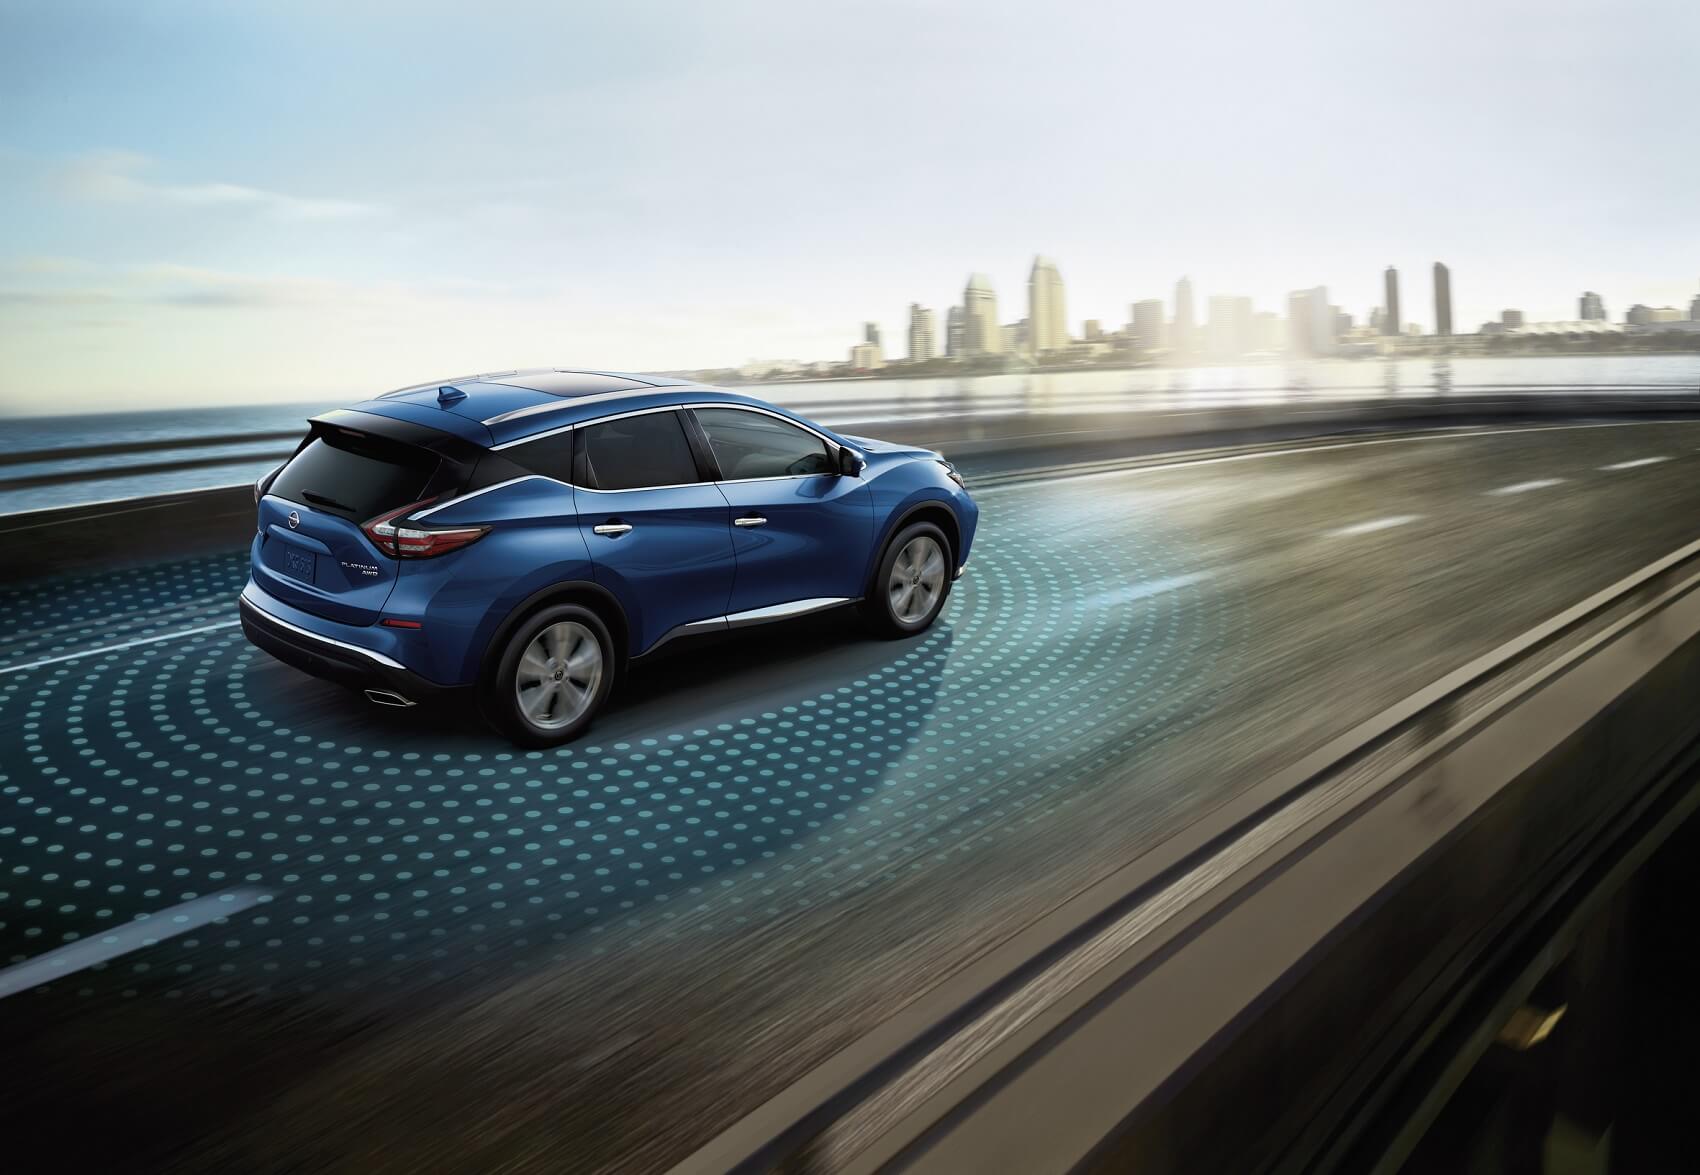 Nissan Murano Towing Capacity Indianapolis IN